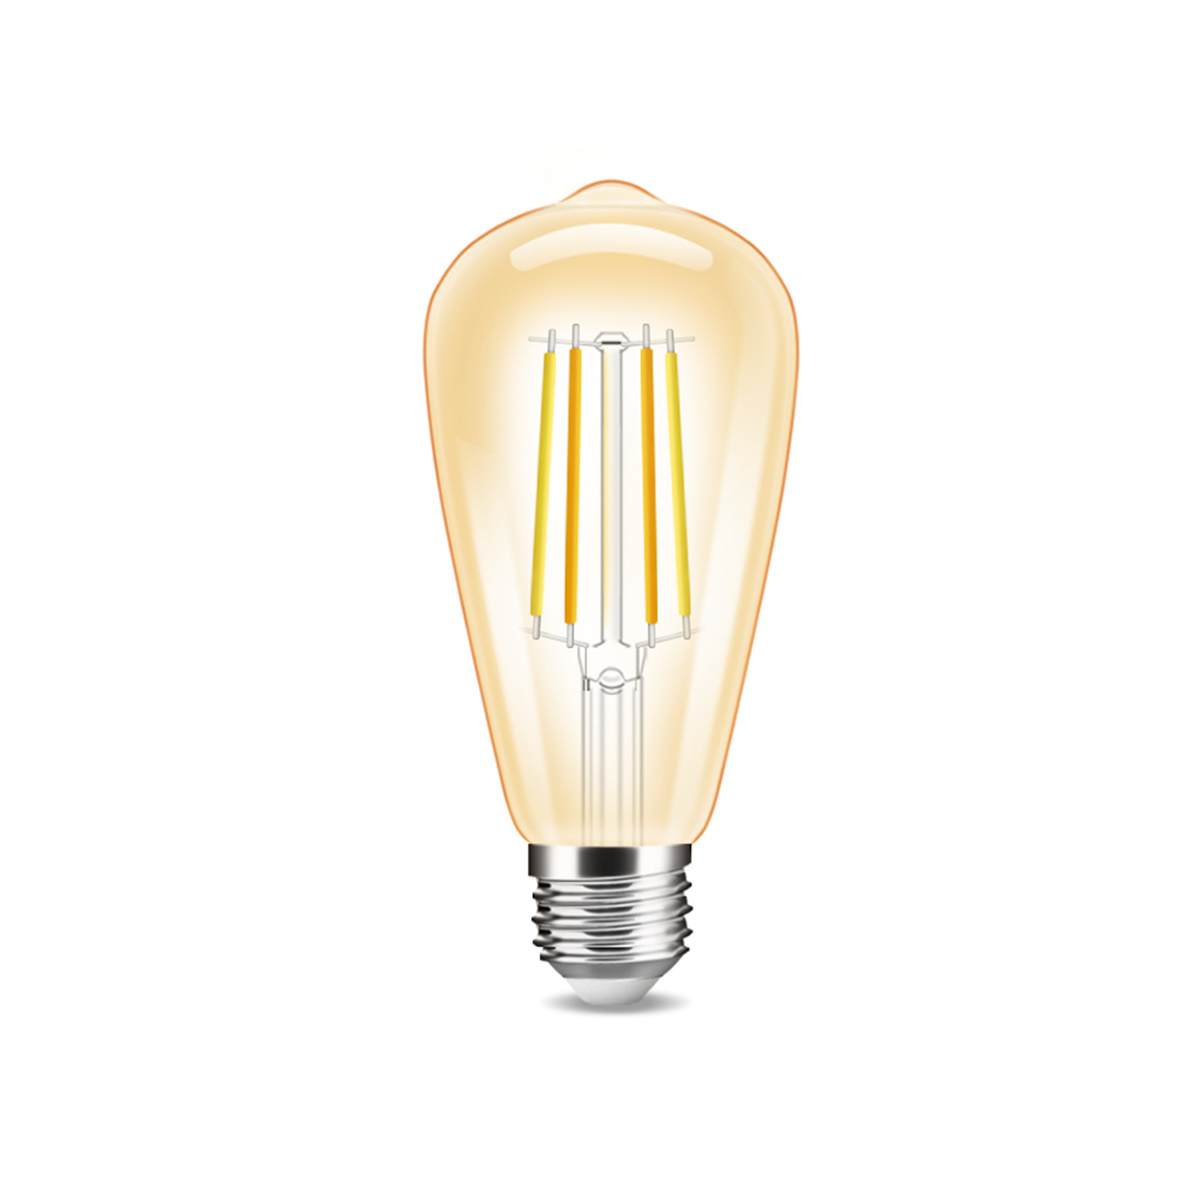 PriceList for Led Recessed Can Light - Dimmable Smart Filament Bulb E27 Vintage With tunable white 2200-6500K CBS – C-Lux